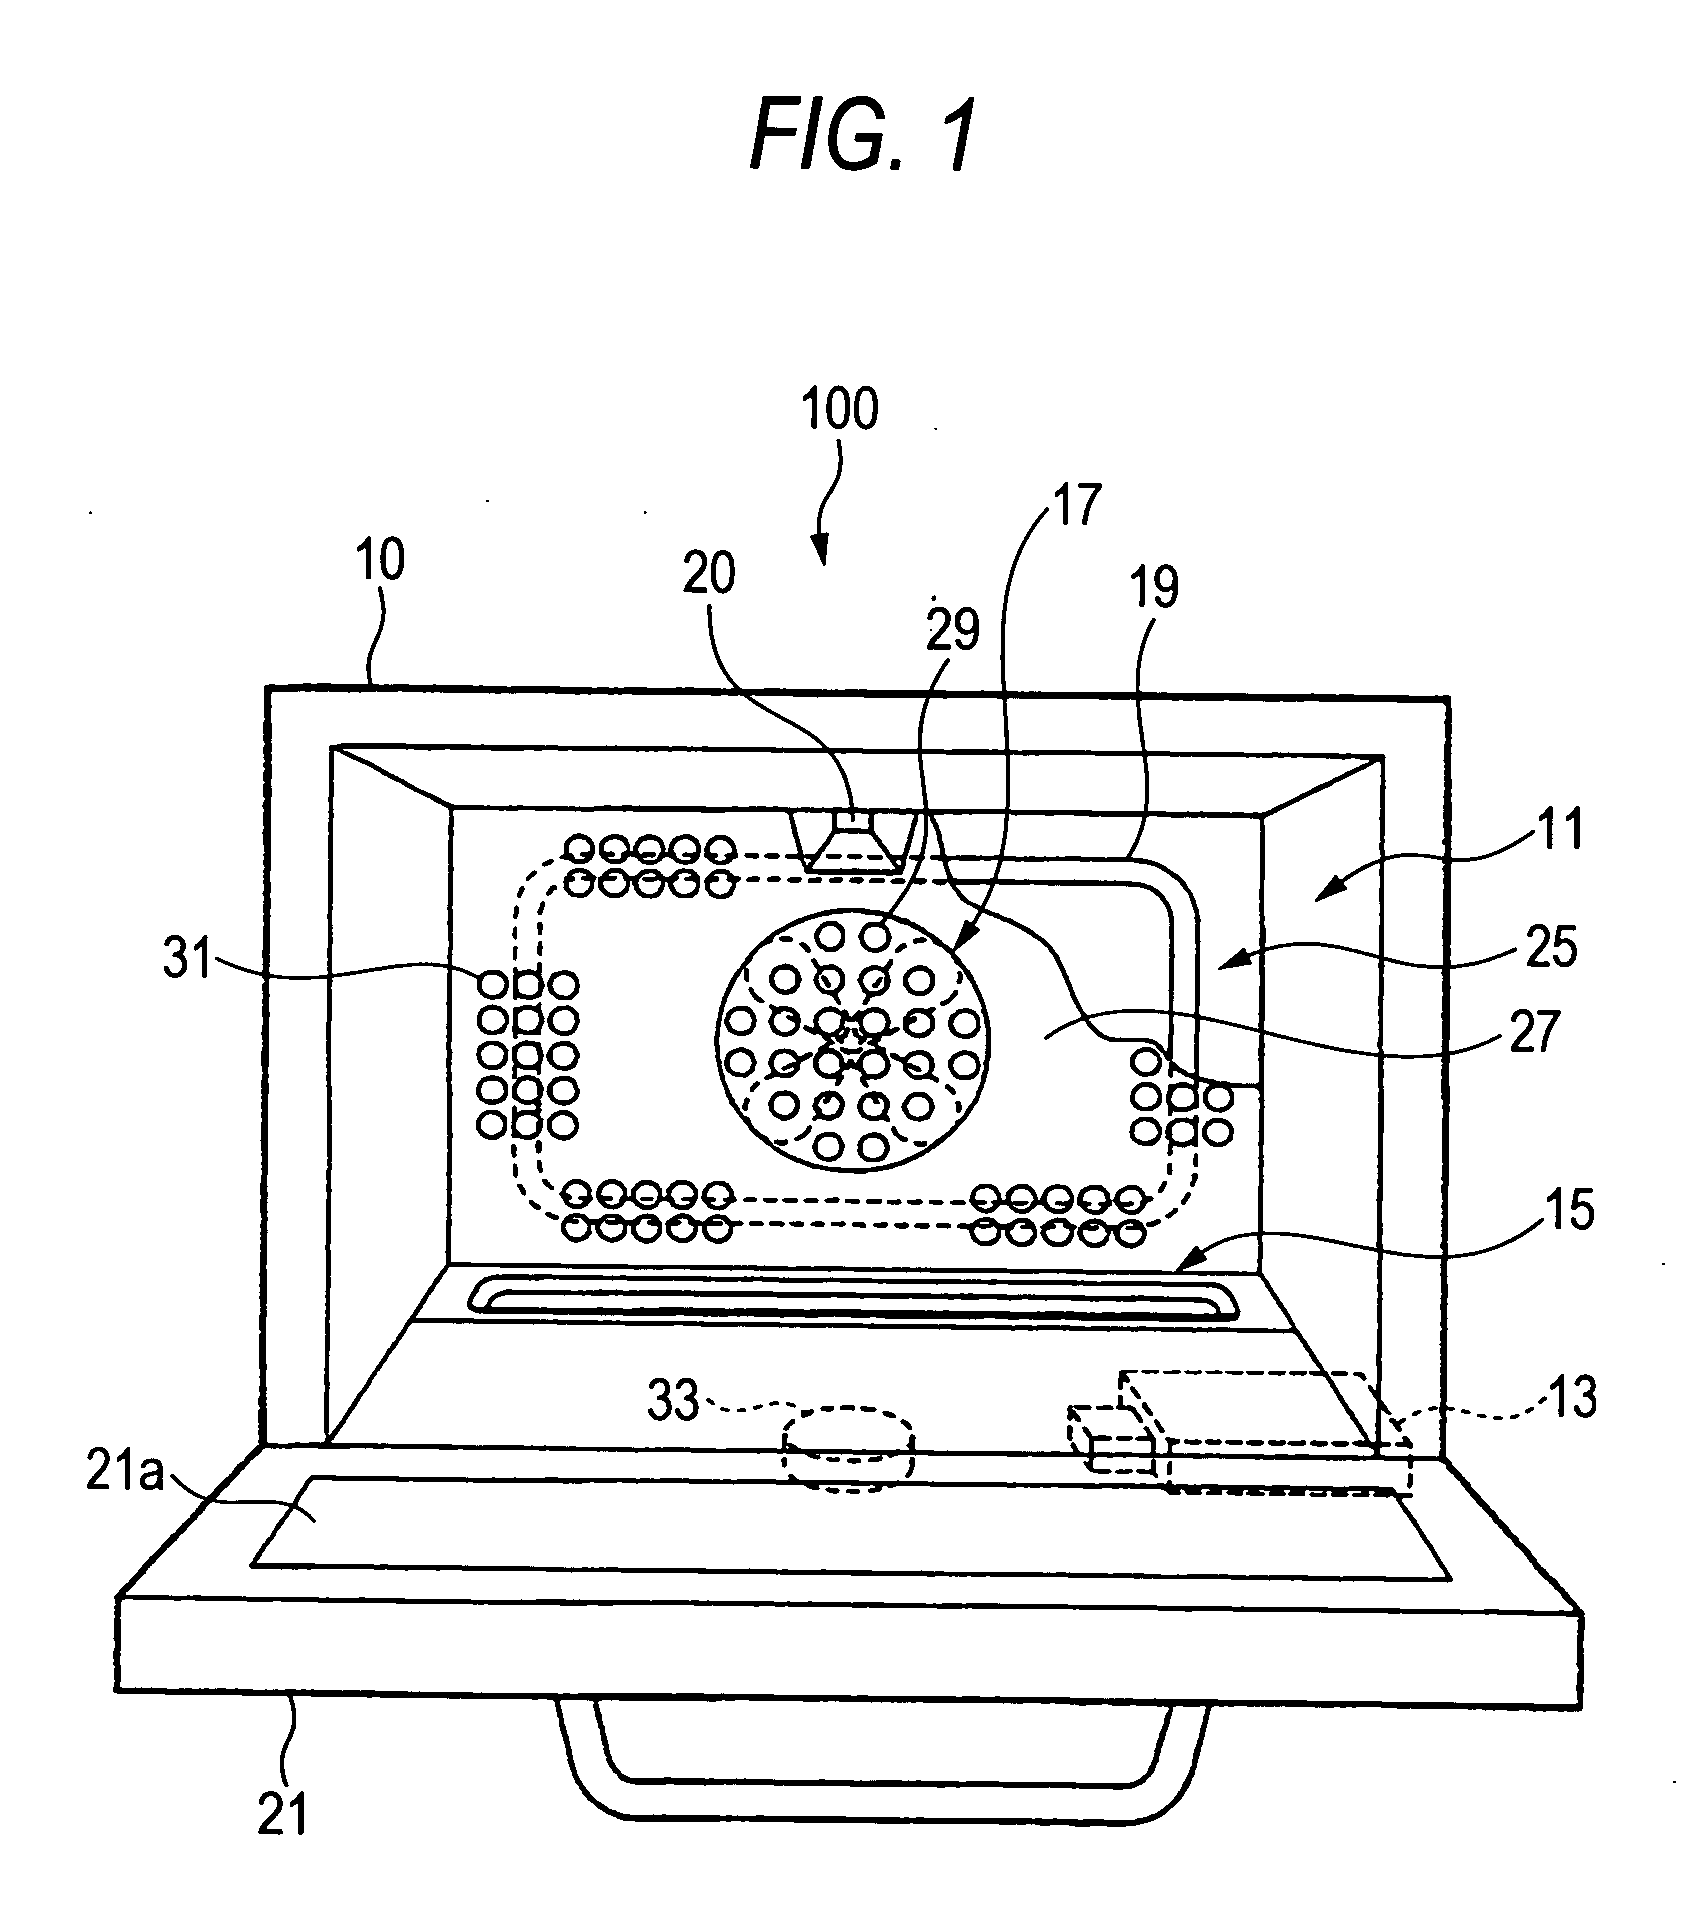 High frequency heating apparatus with steam generating function